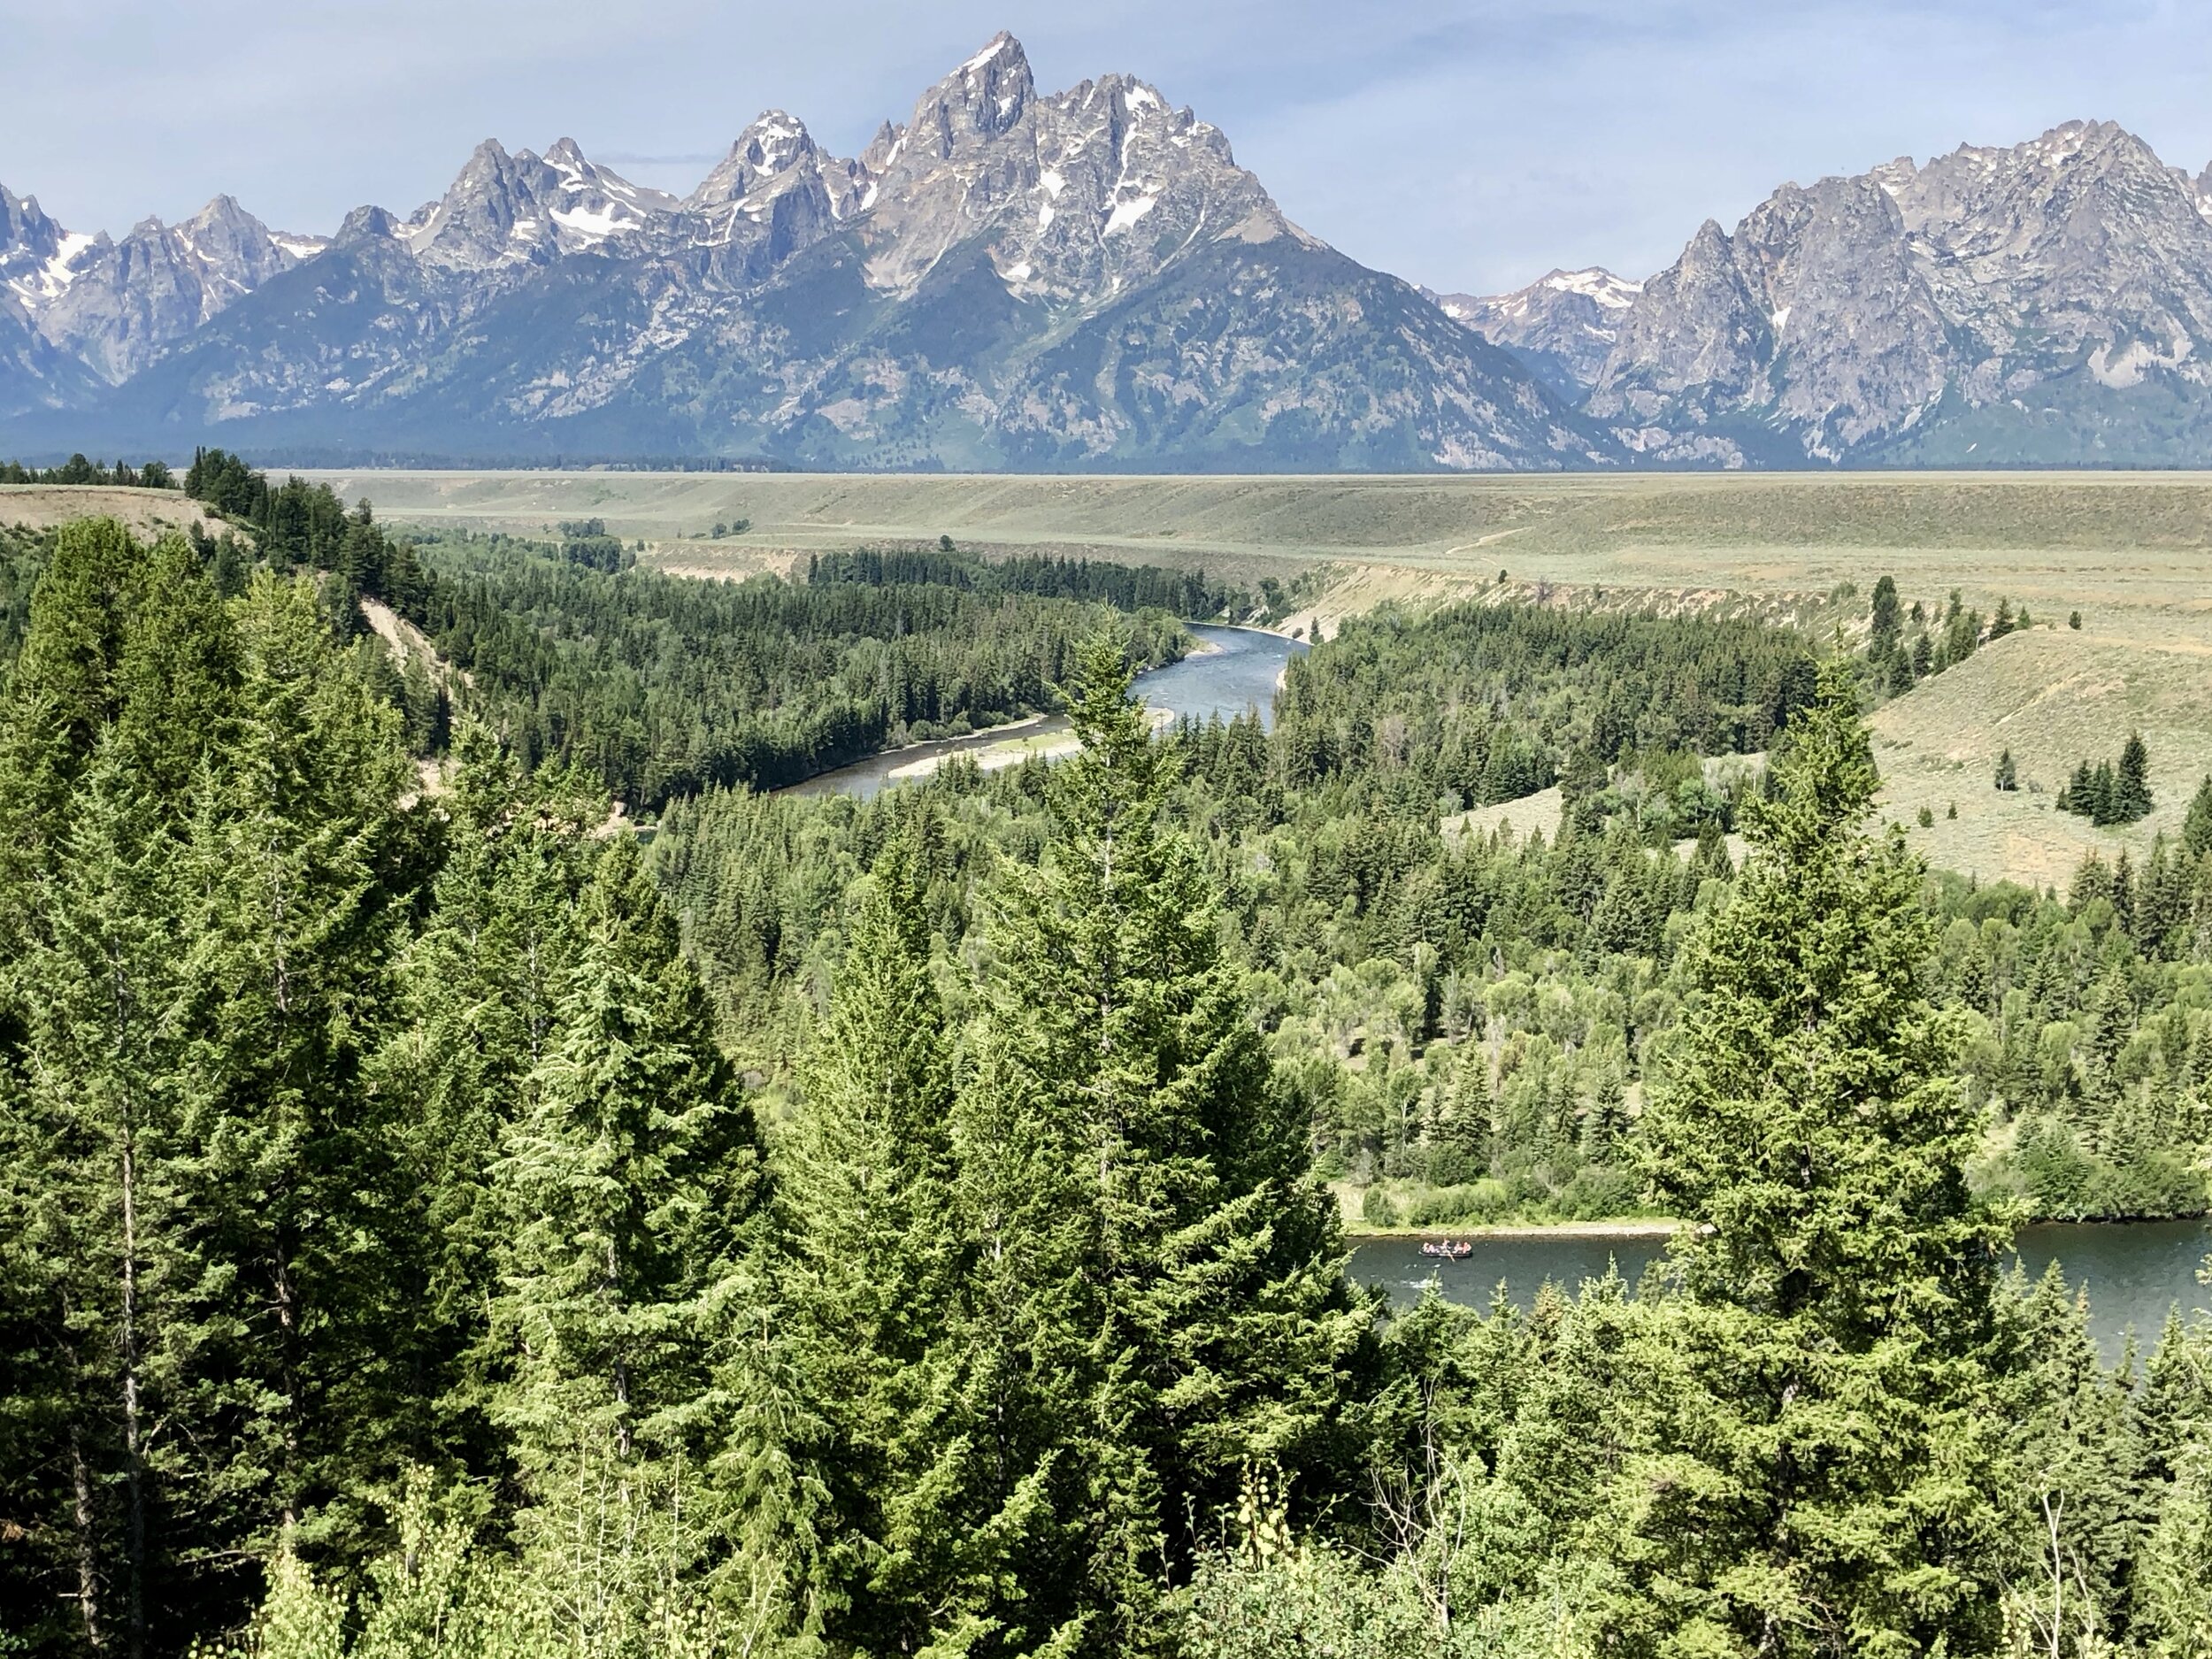 The Snake River winds through the valley east of the Teton Mountain Range.